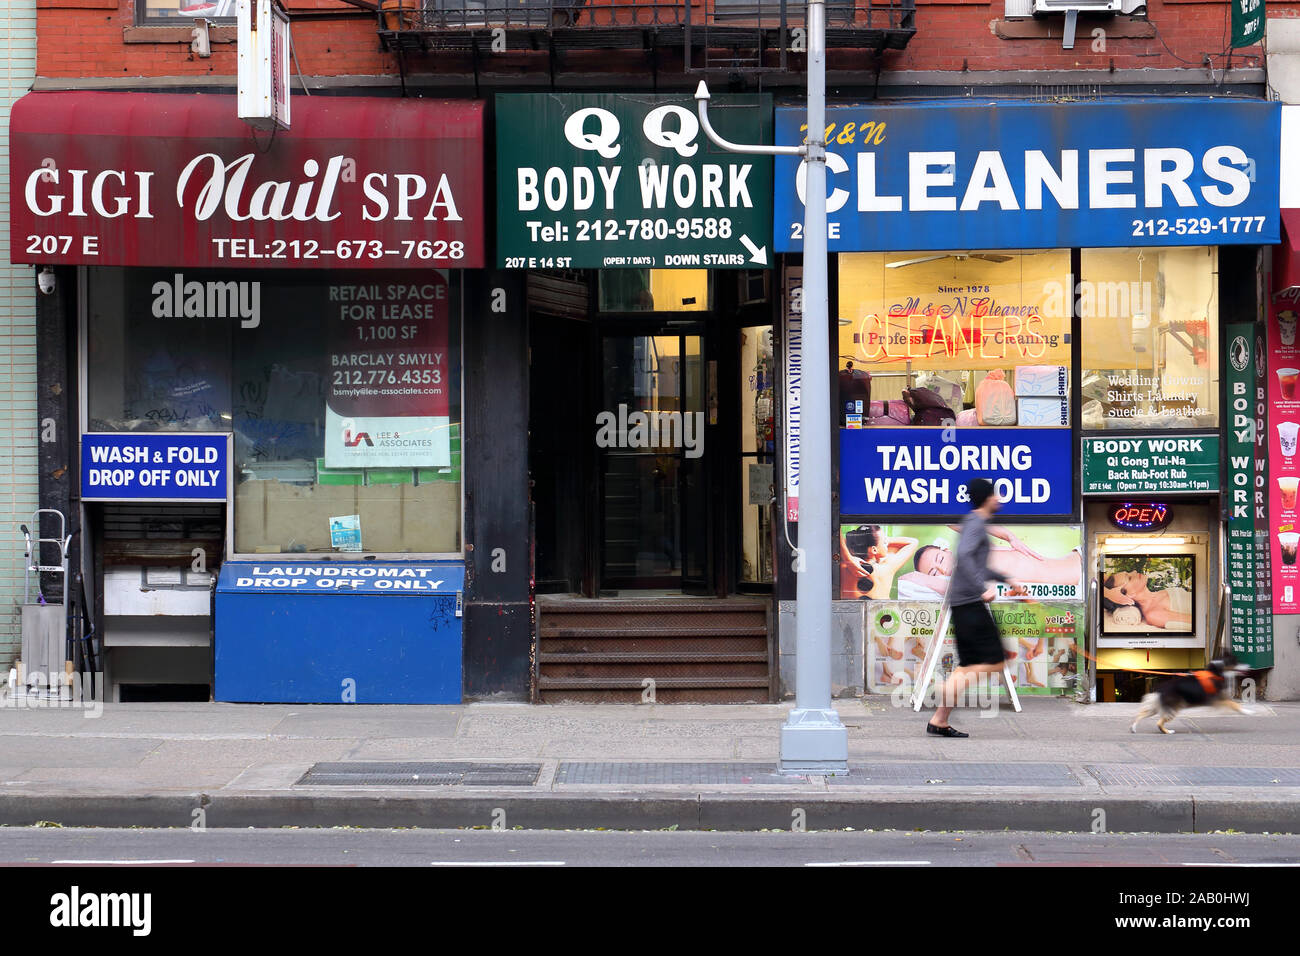 Laundromat and massage parlor storefronts along East 14th St in the East Village neighborhood of Manhattan in New York, NY. Stock Photo